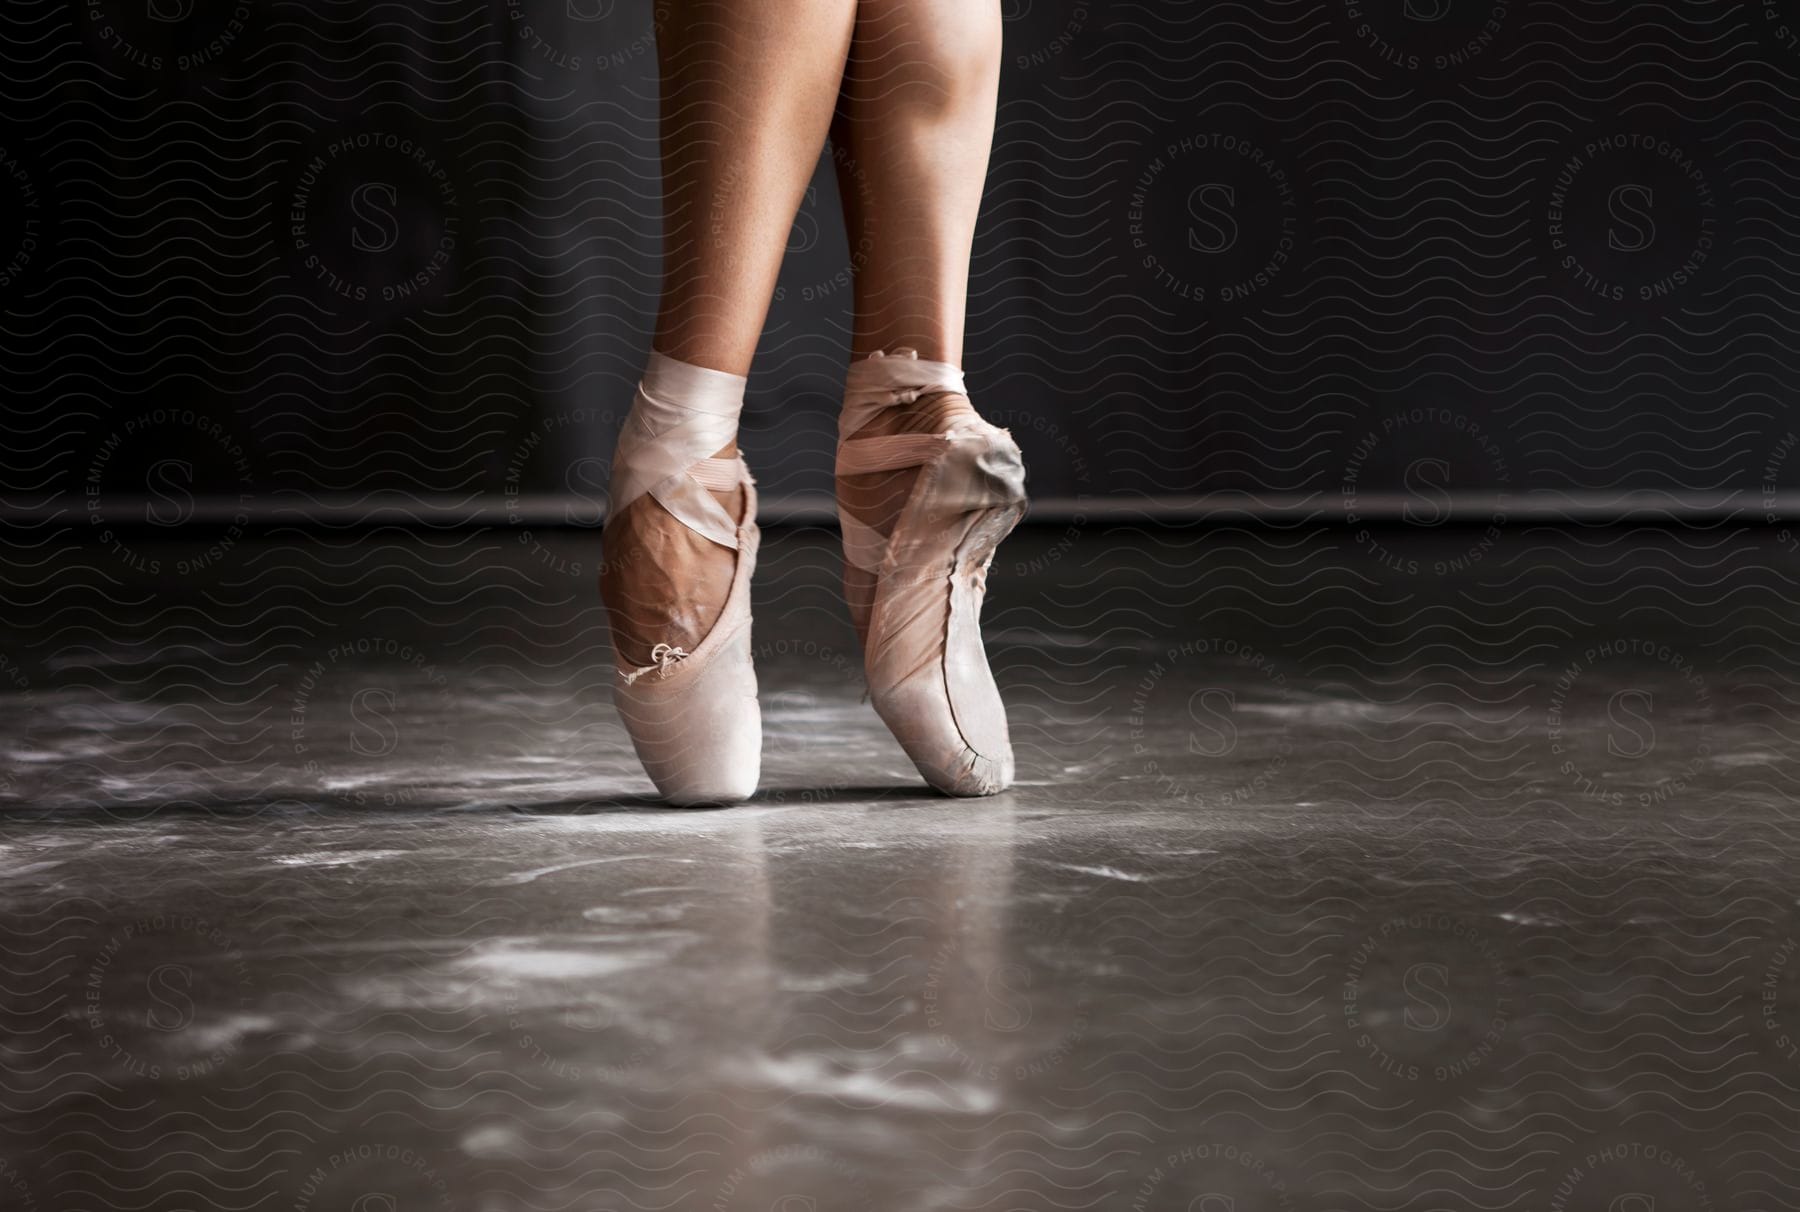 A ballerina stands on the tips of her toes